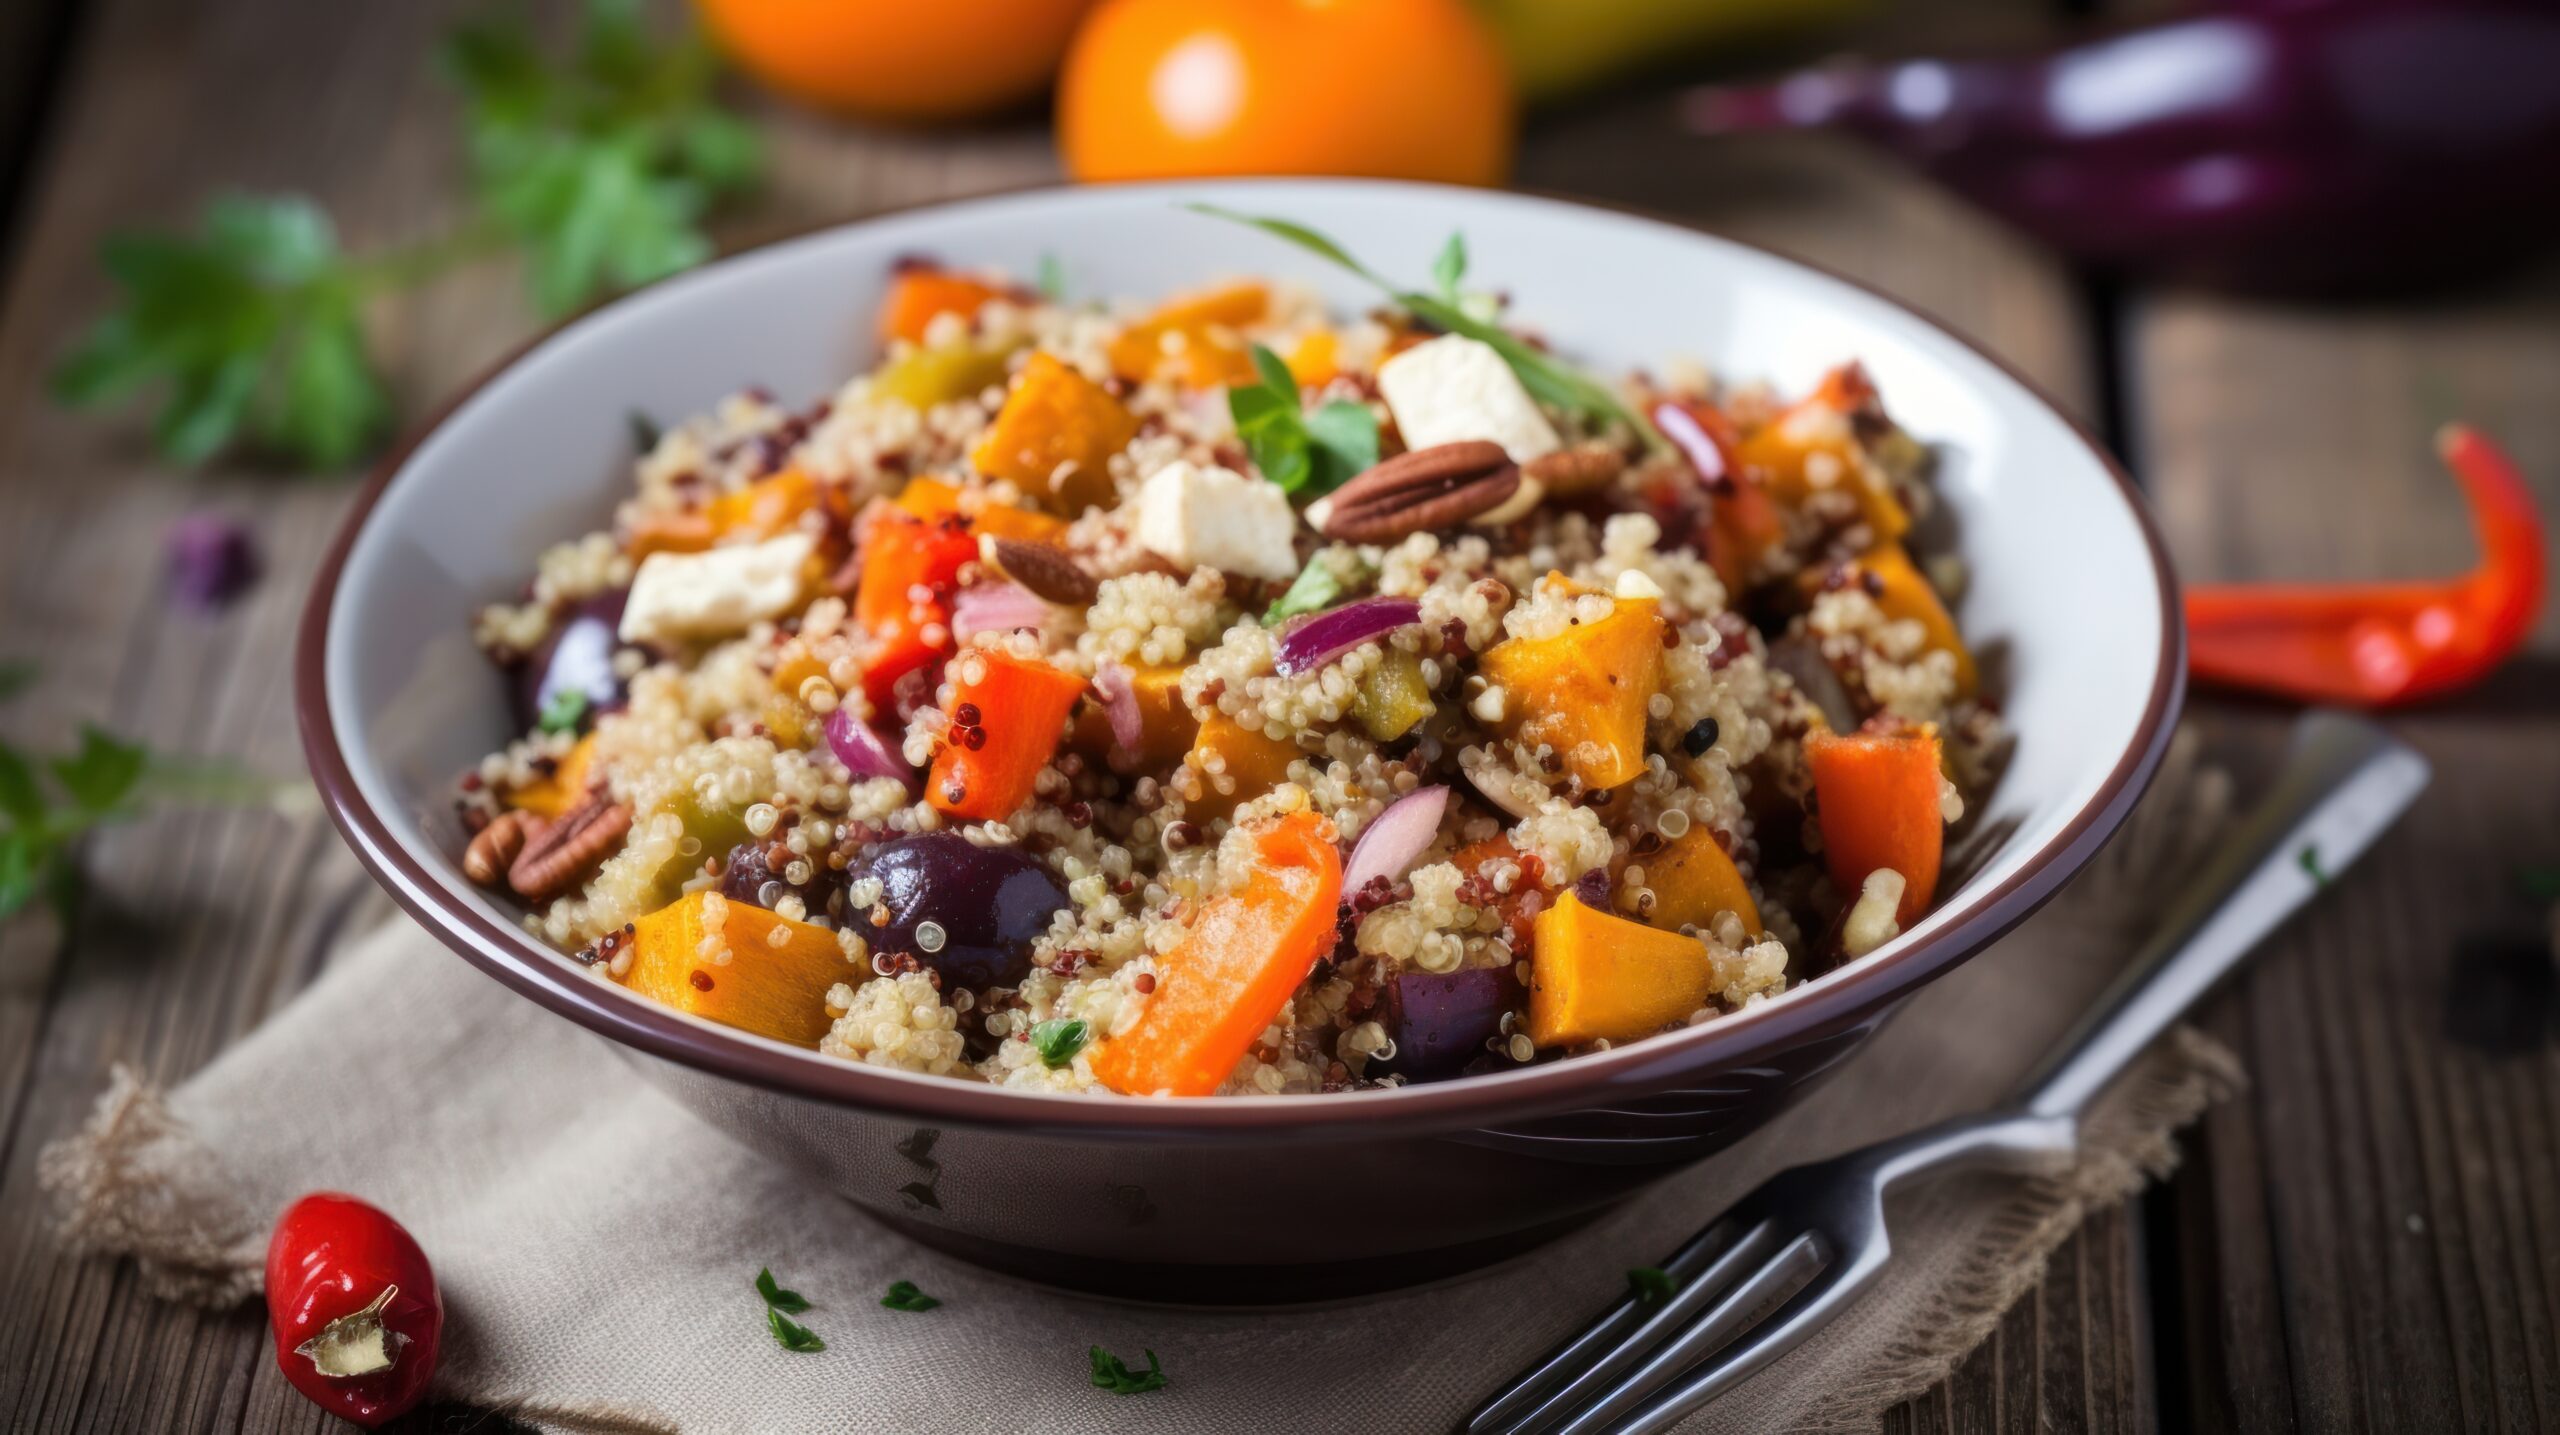 roasted vegetables and quinoa